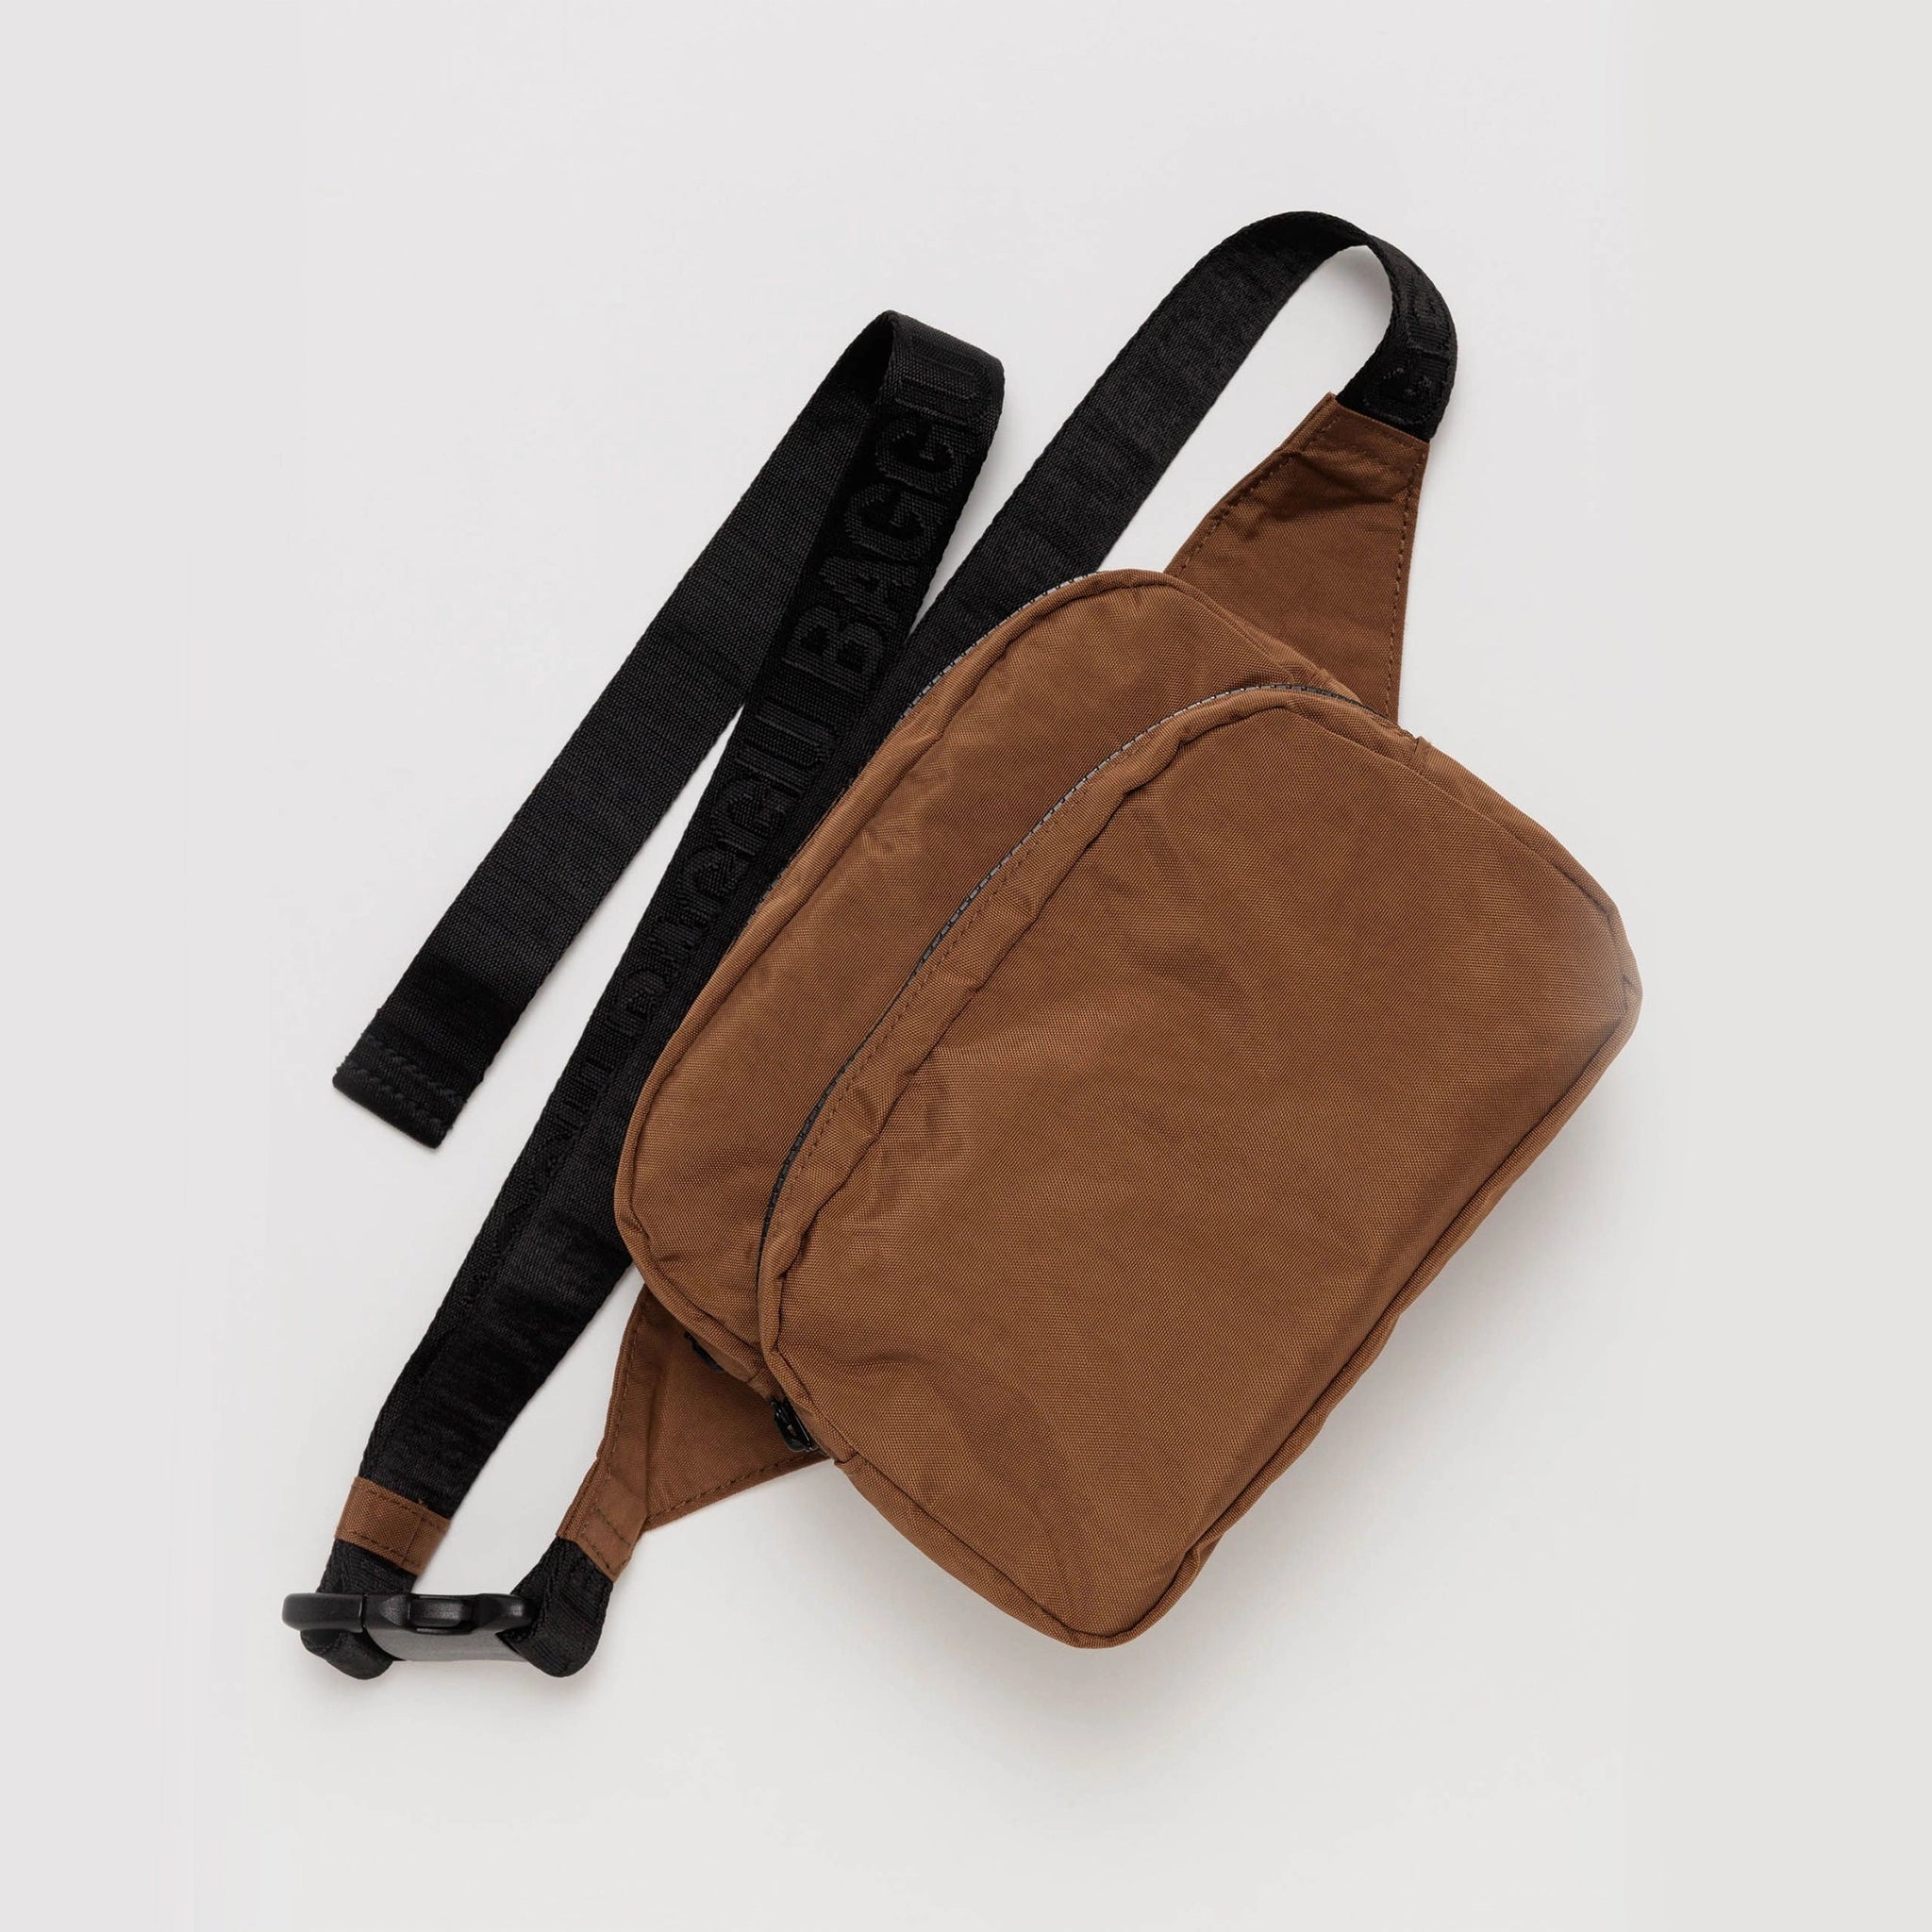 On a white background is a brown fanny pack with two zippers with a black strap. 